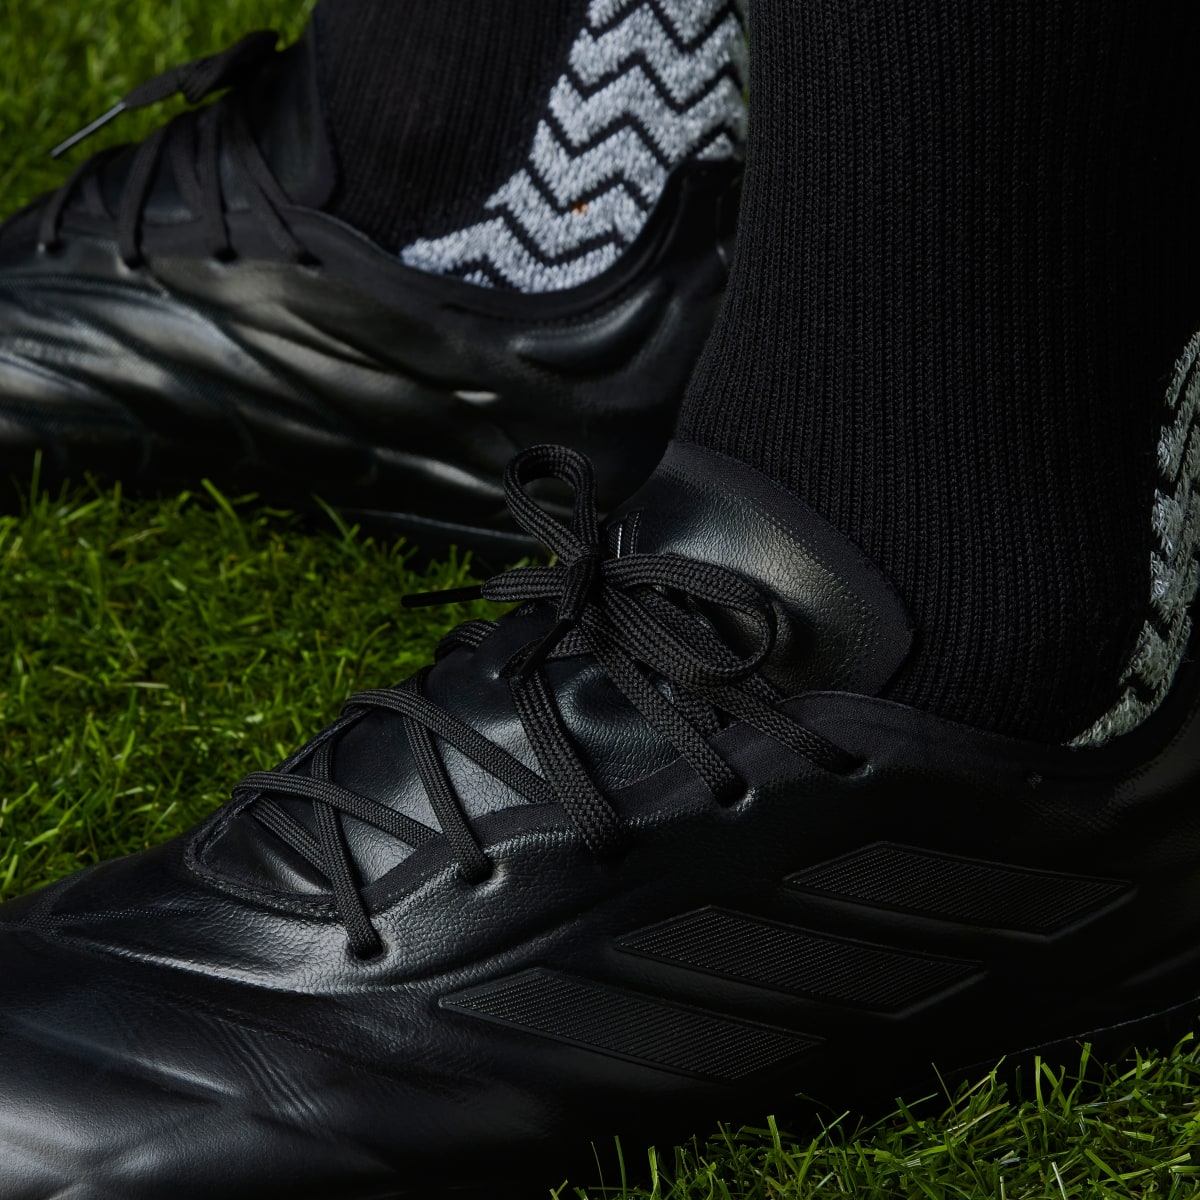 Adidas Copa Pure.1 Firm Ground Boots. 6